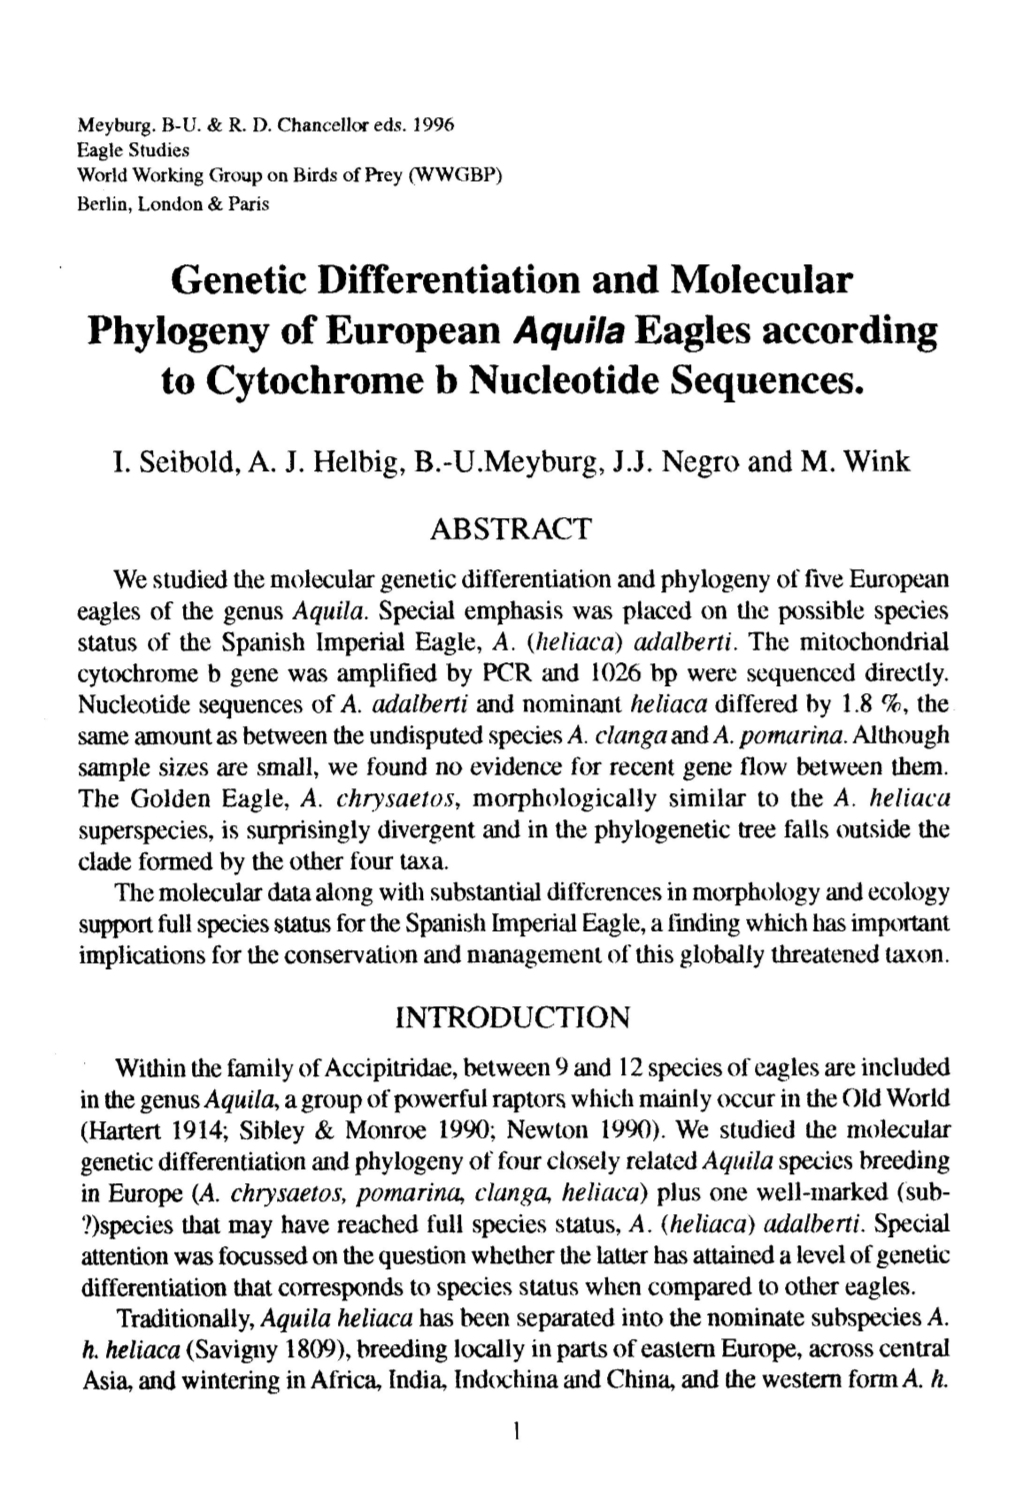 Genetic Differentiation and Molecular Phylogeny of European Aquiia Eagles According to Cytochrome B Nucleotide Sequences